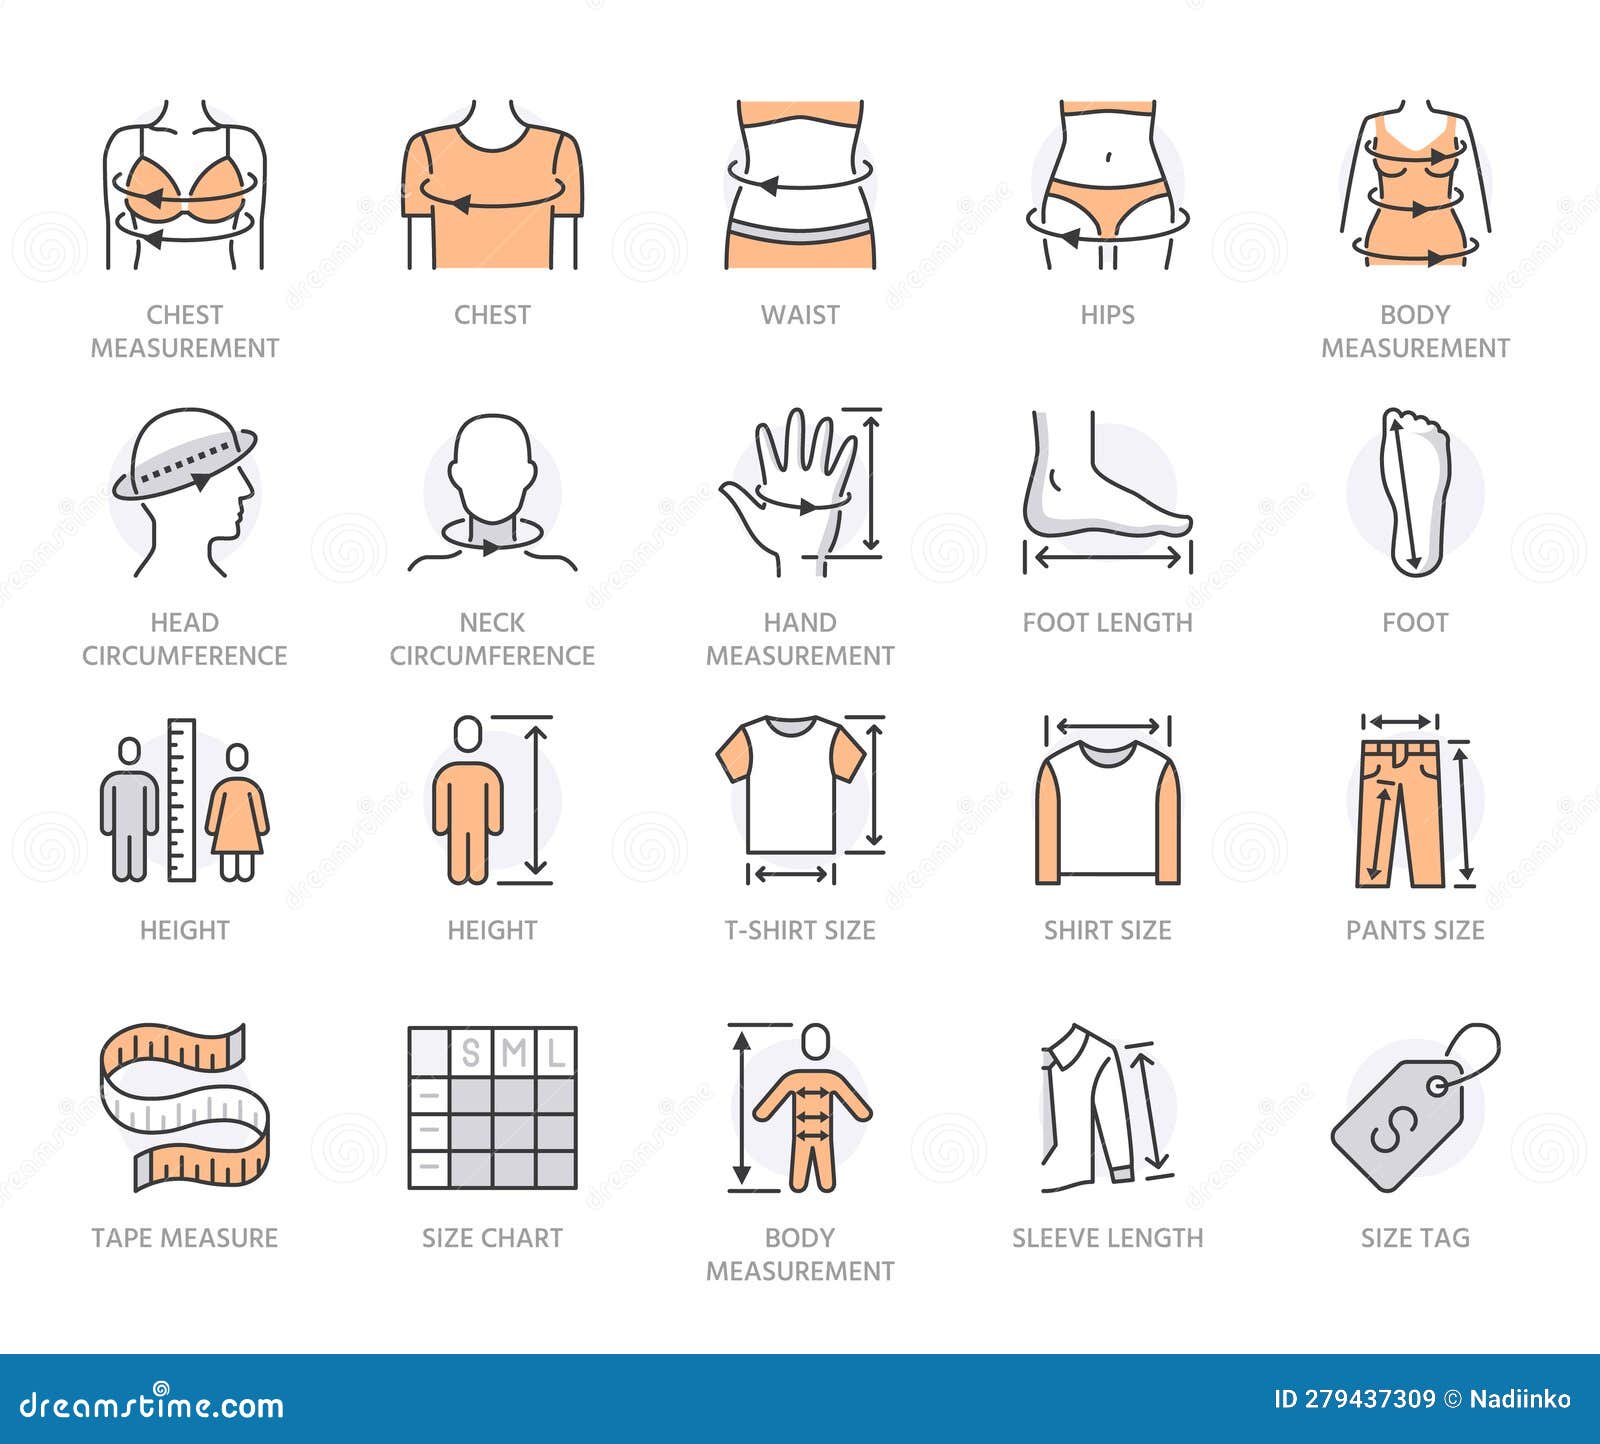 clothes size flat line icons set. body measurement - waist circumference, hip, chest, sleeve length, height 